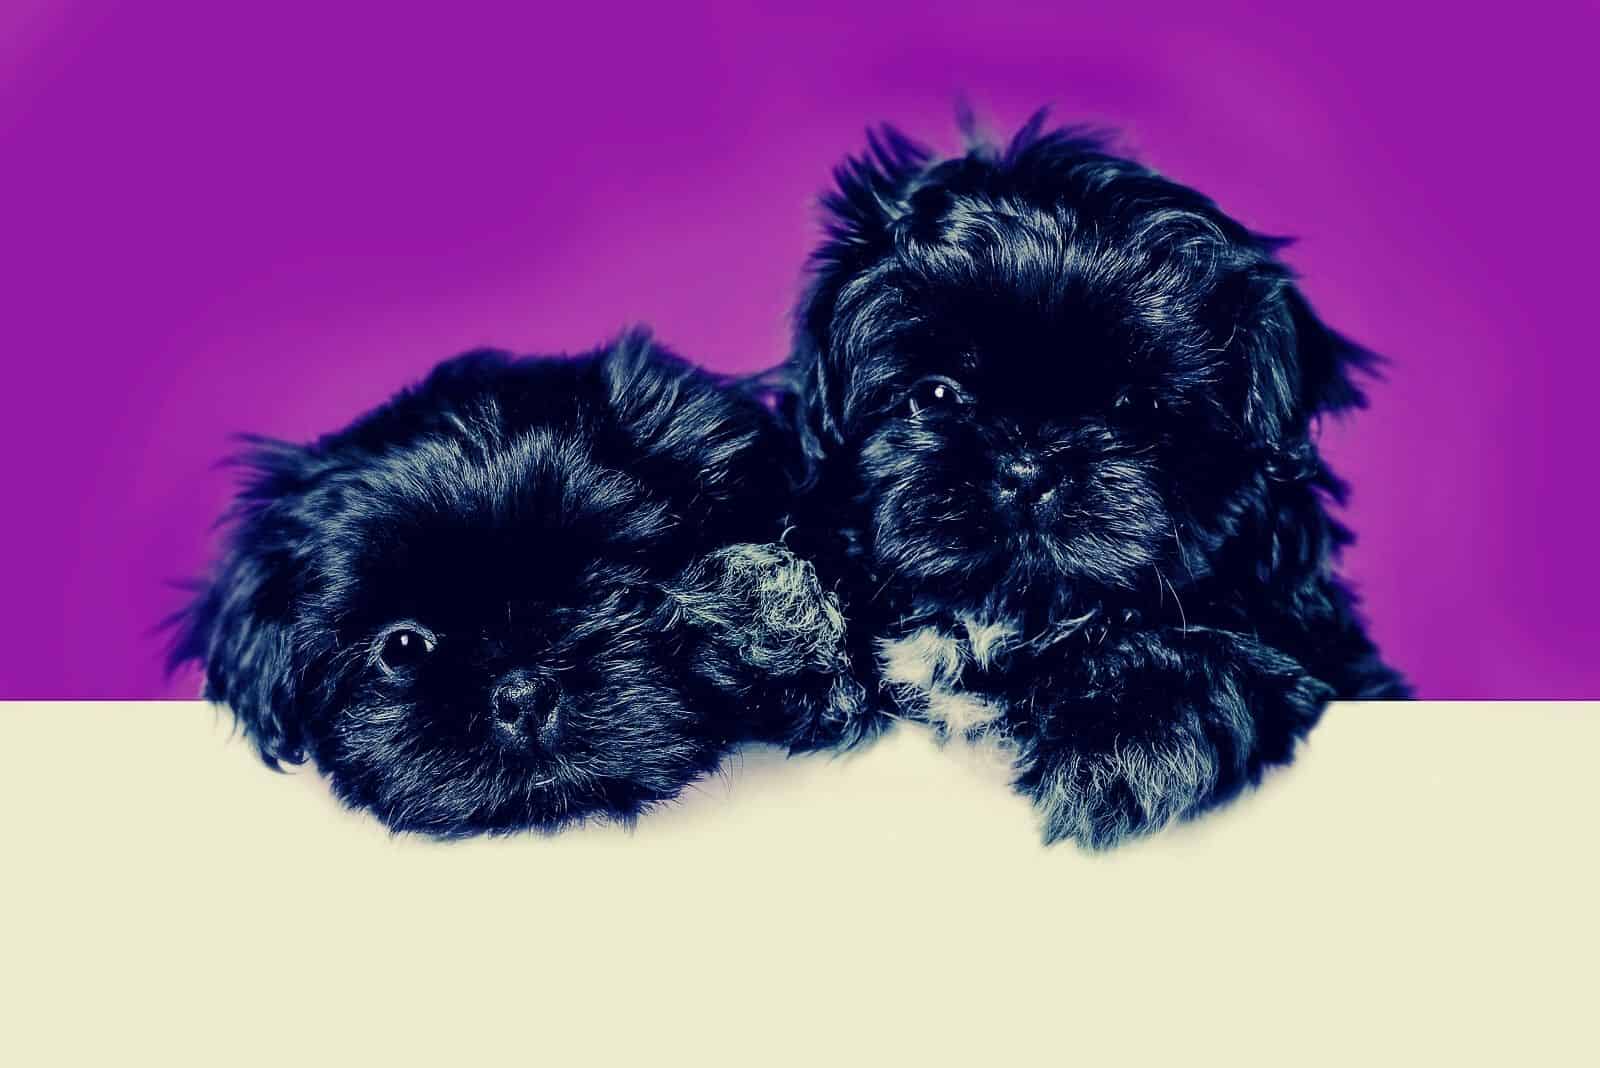 blue shih tzu puppies lying down next to each other in purple background